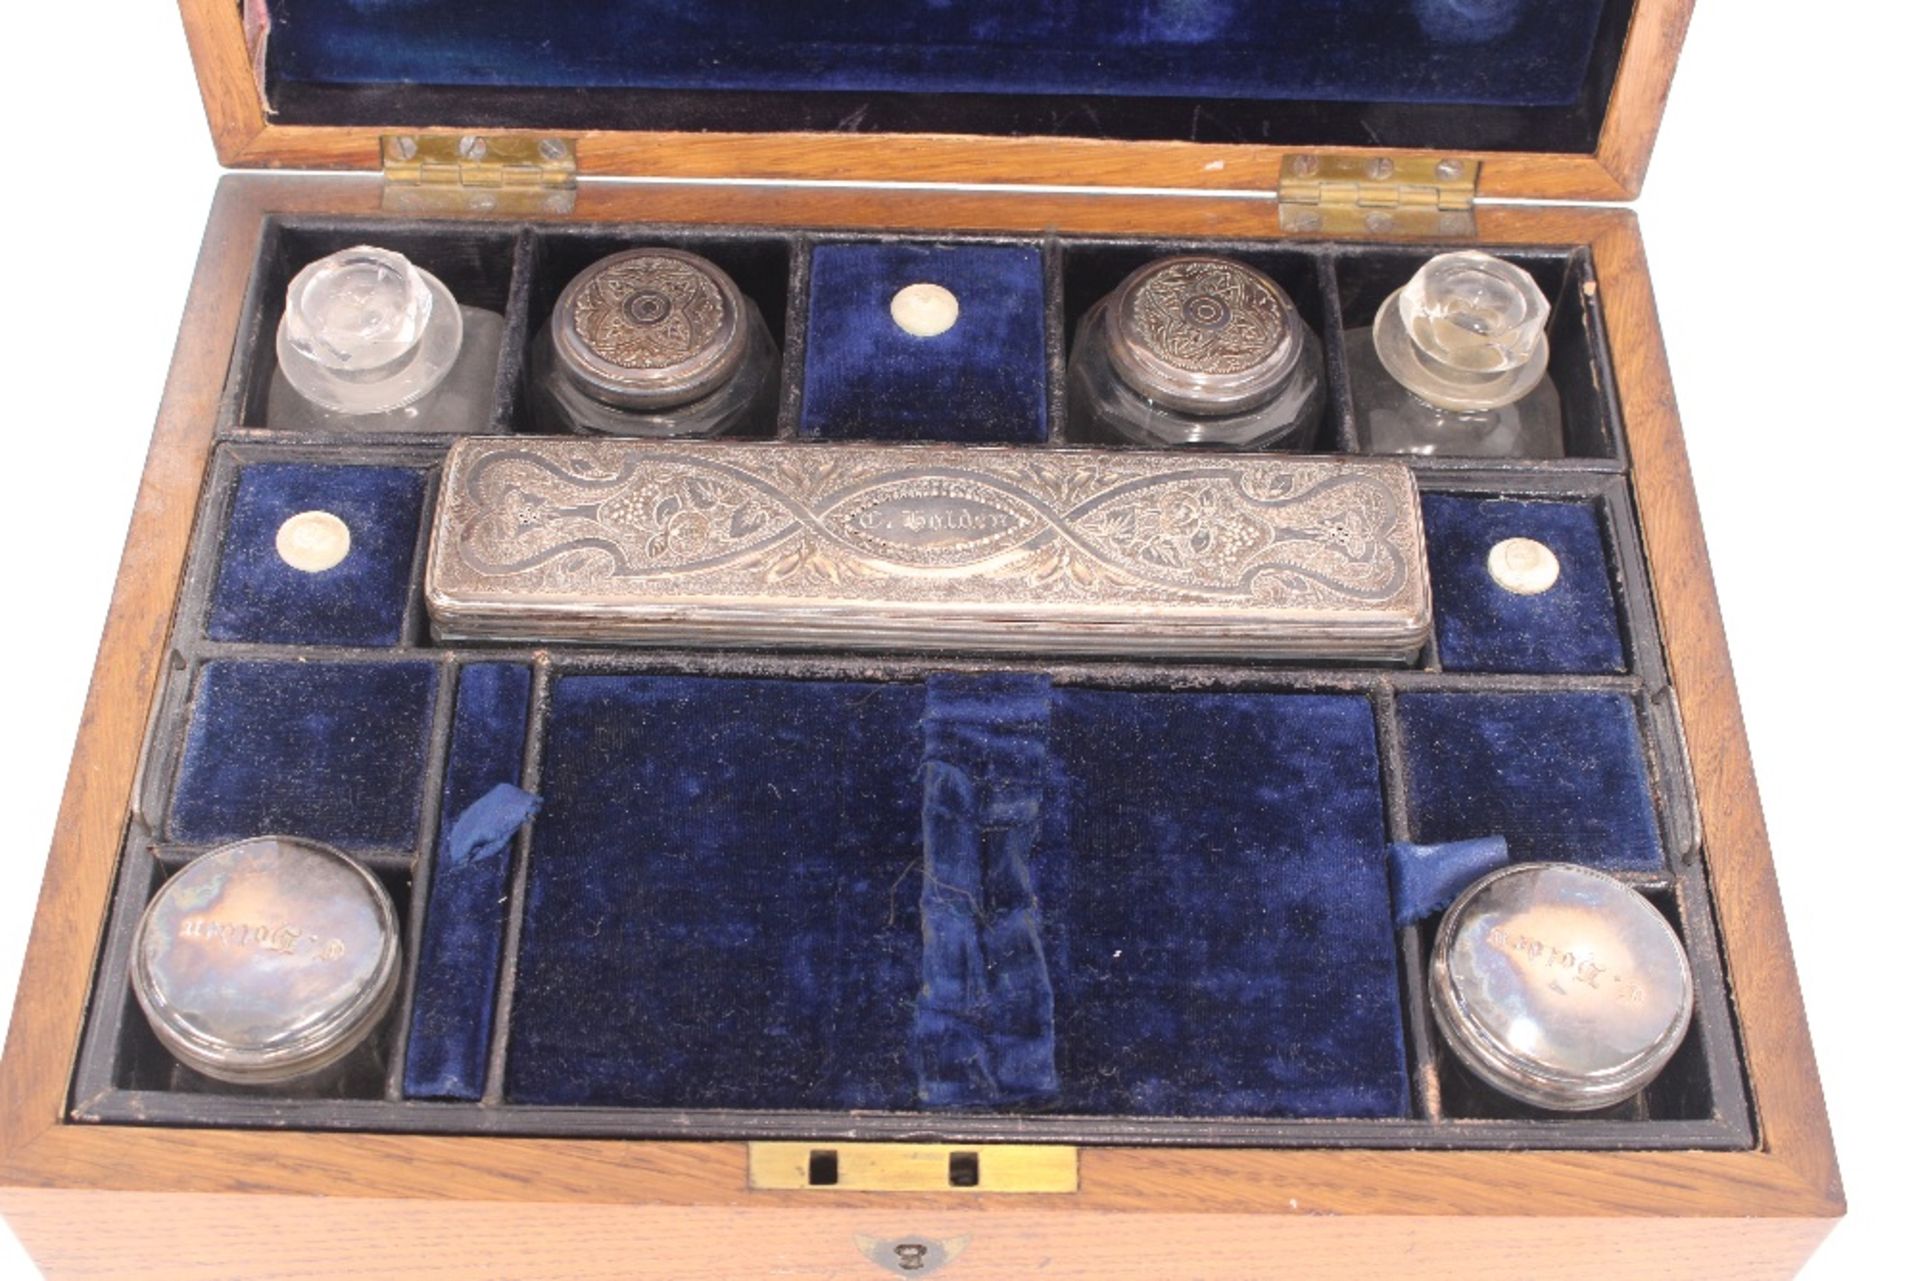 A 19th century golden oak, cased vanity box containing various bottles and tidy jars with foliate - Image 3 of 3